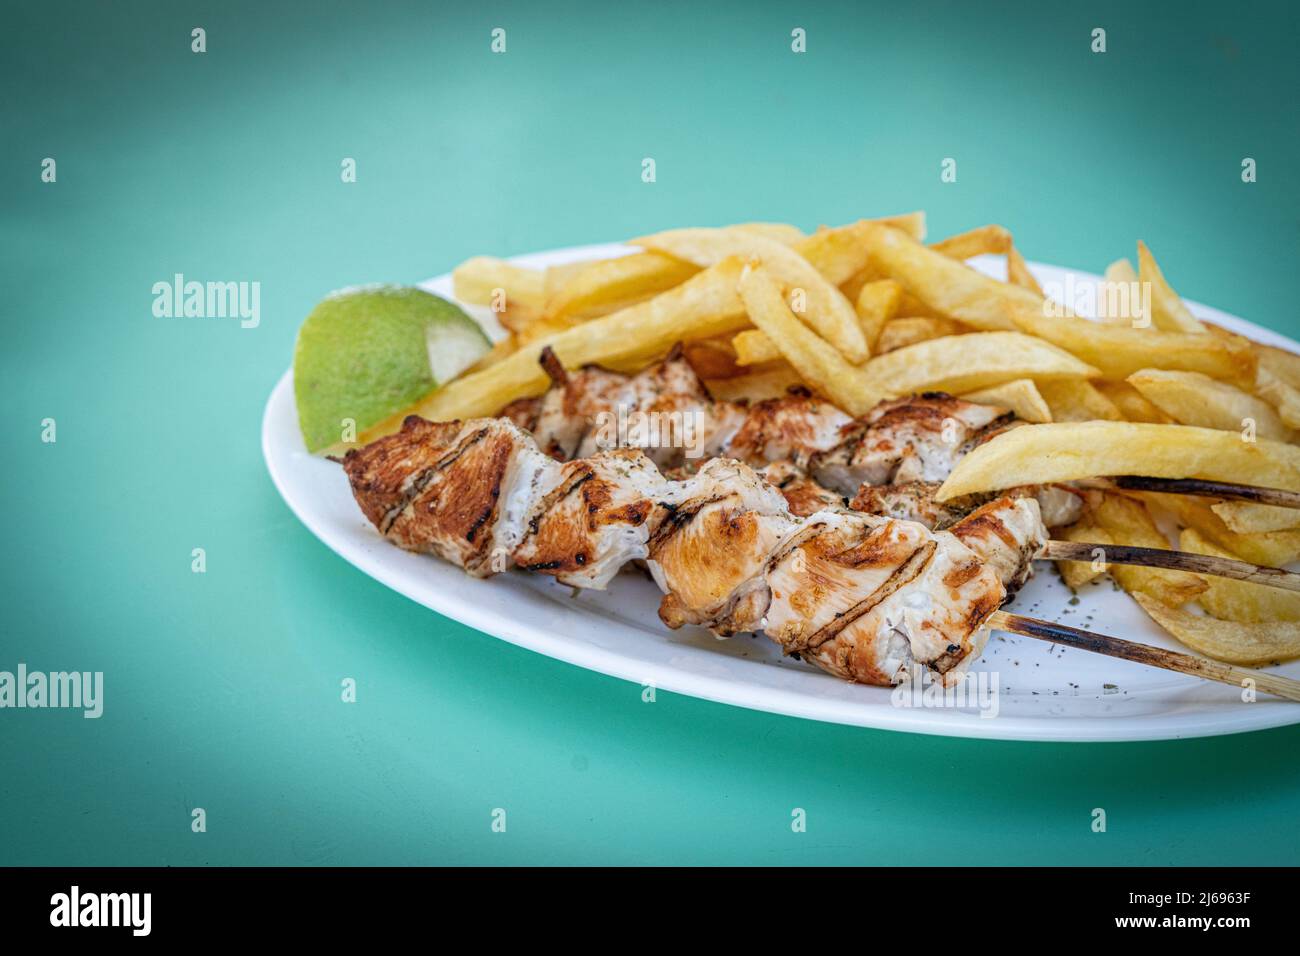 Souvlaki, popular Greek food consisting of small pieces of meat grilled on a skewer served with french fries, Greek Islands, Greece, Europe Stock Photo